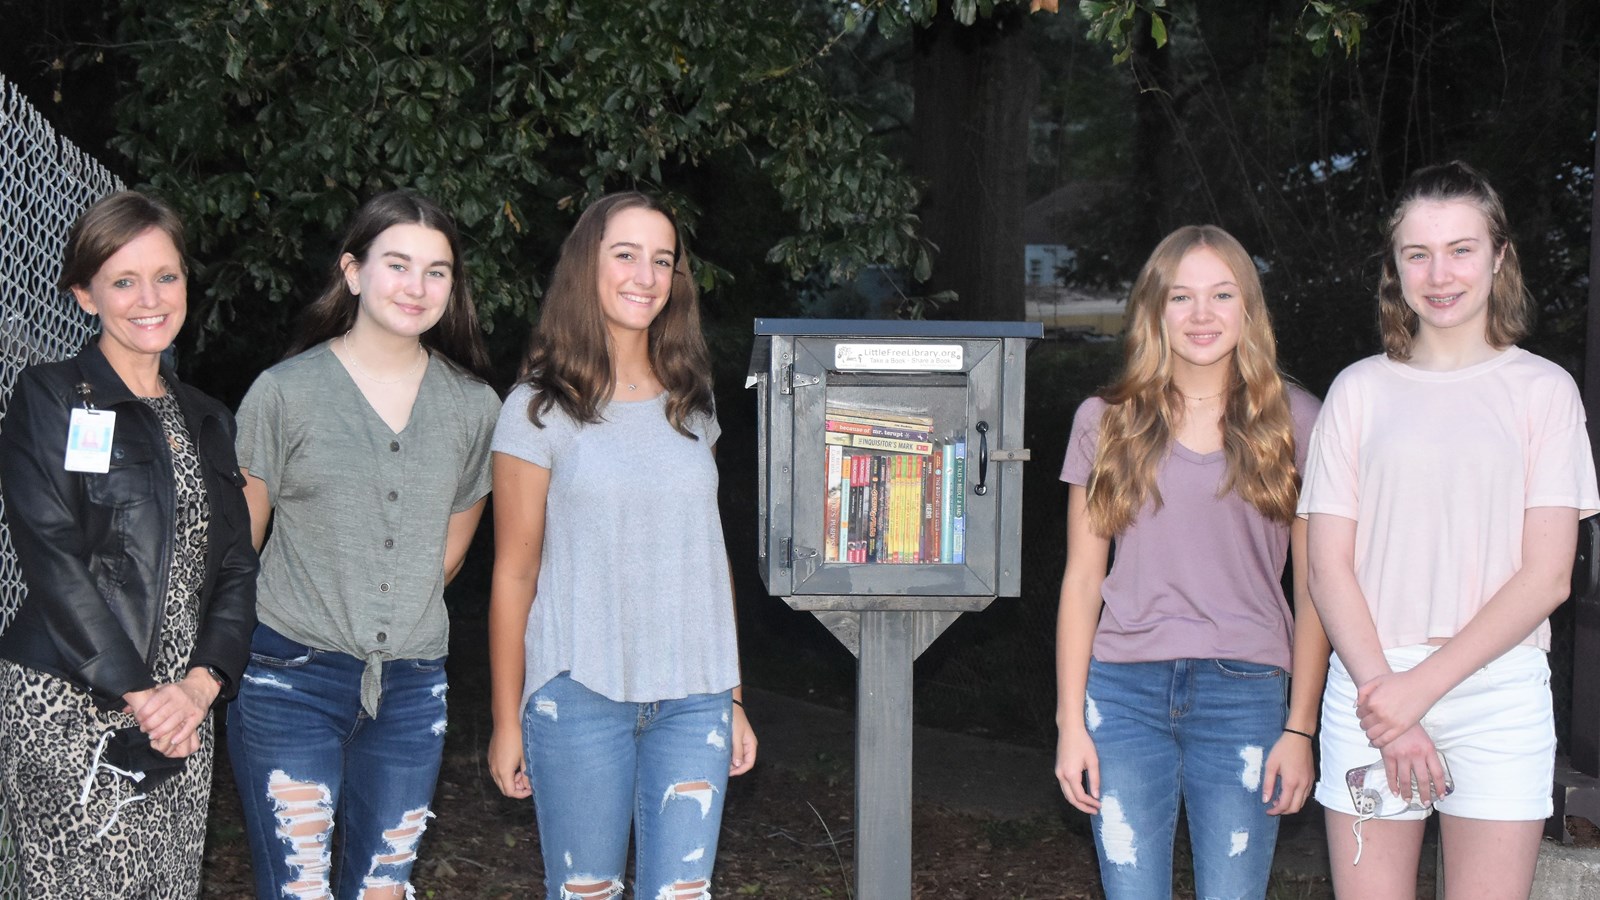 Pope High School students open Little Free Library at Green Acres Elementary